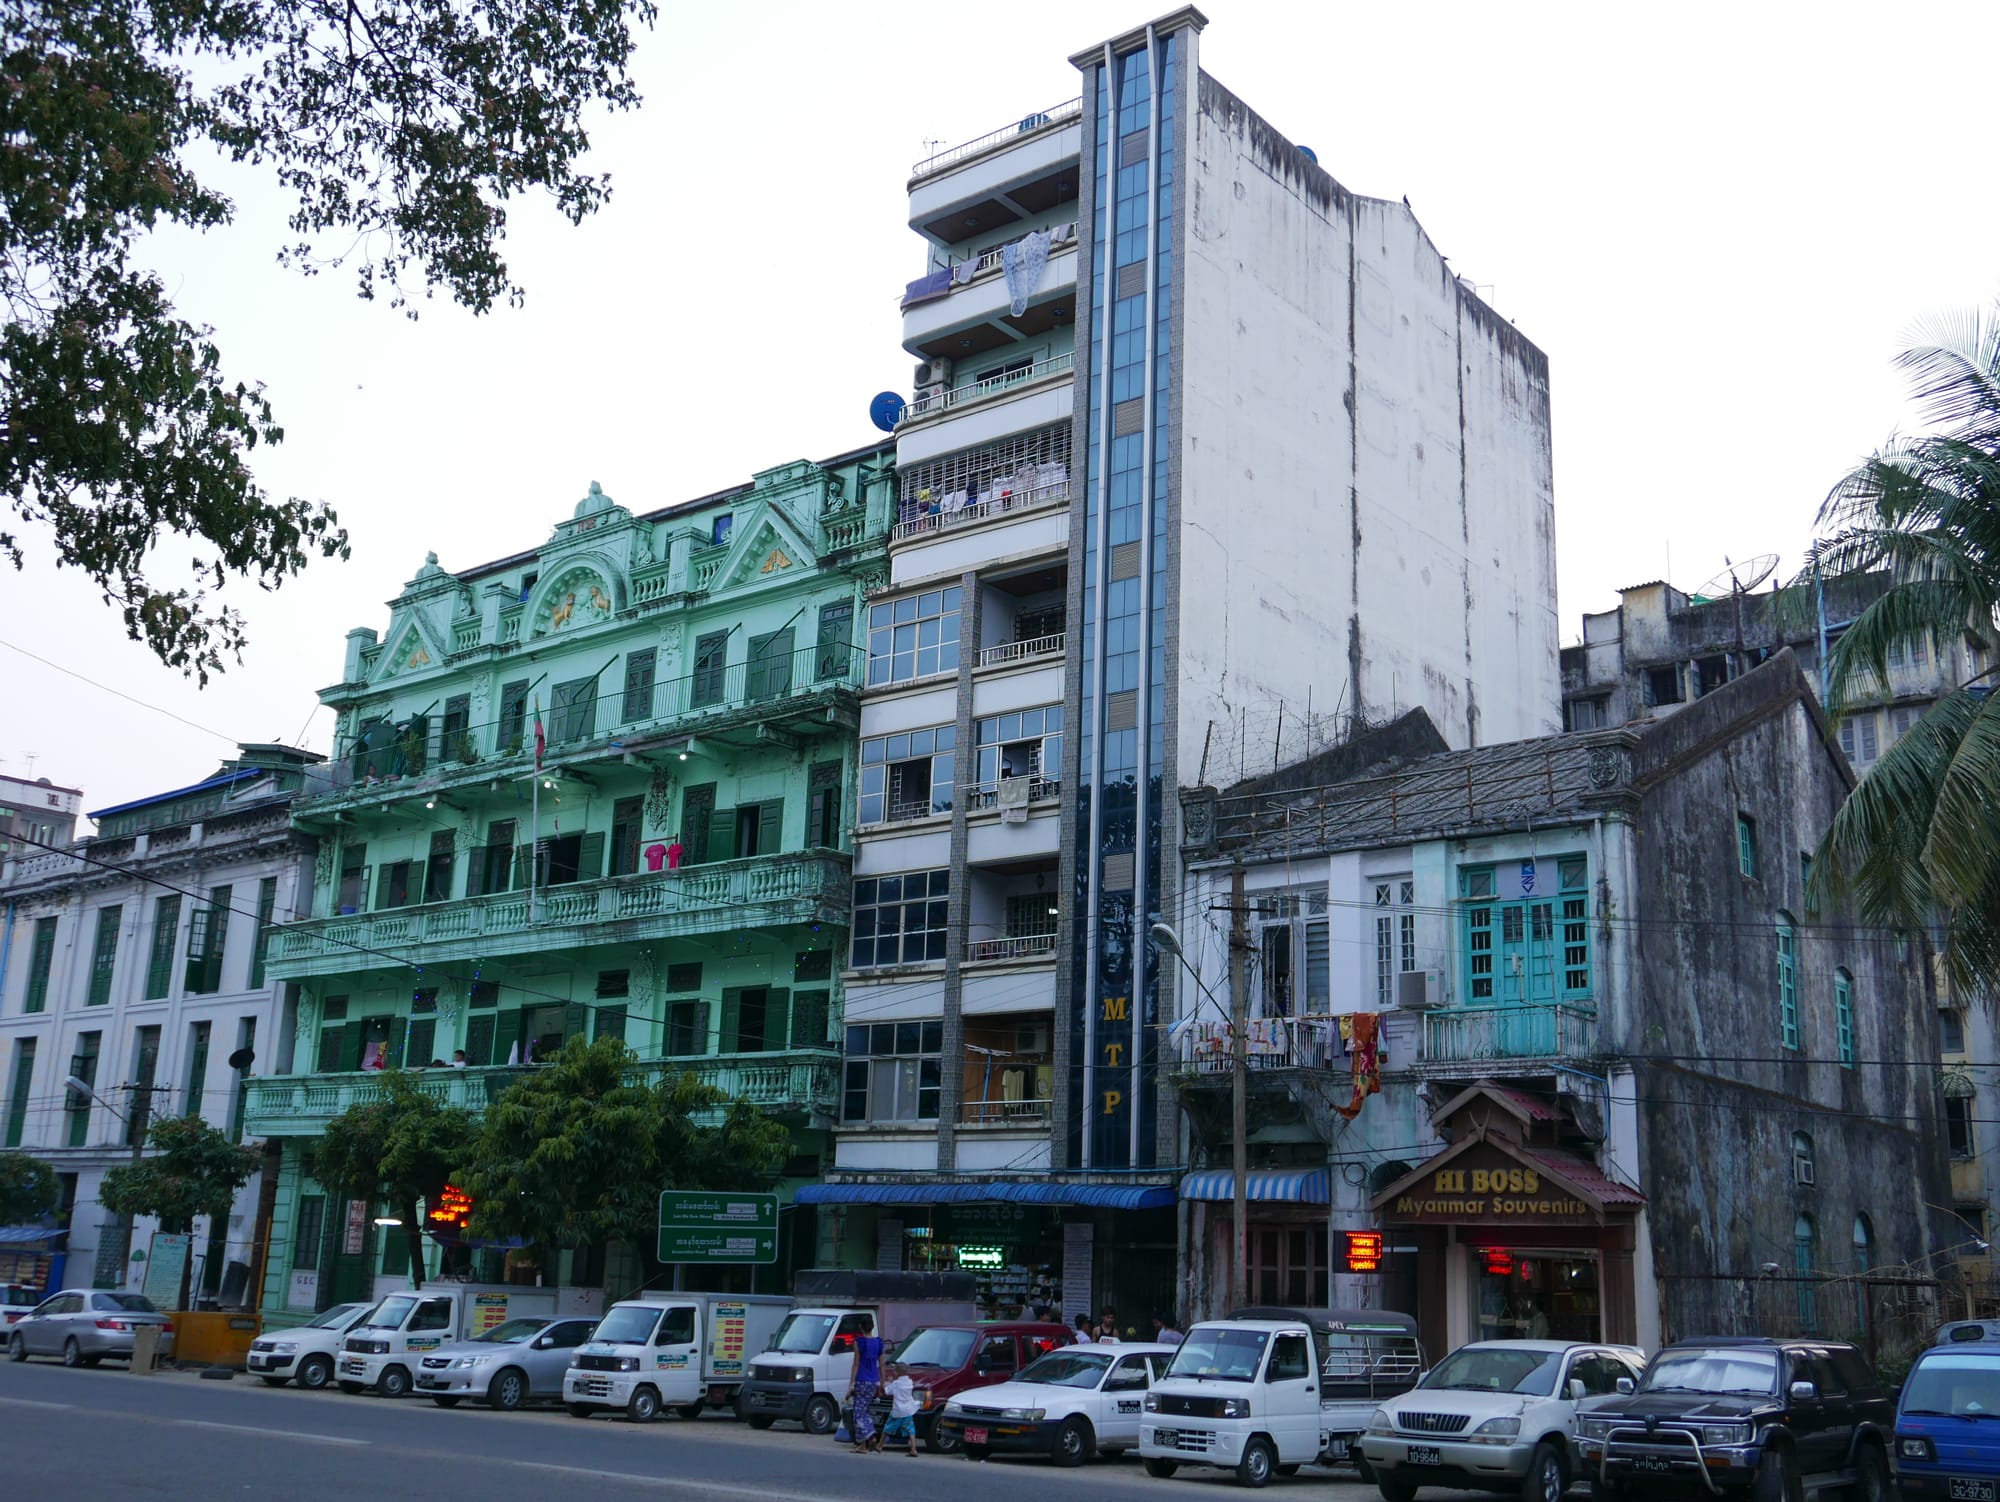 Photo by Author — a lack of planning in Yangon?